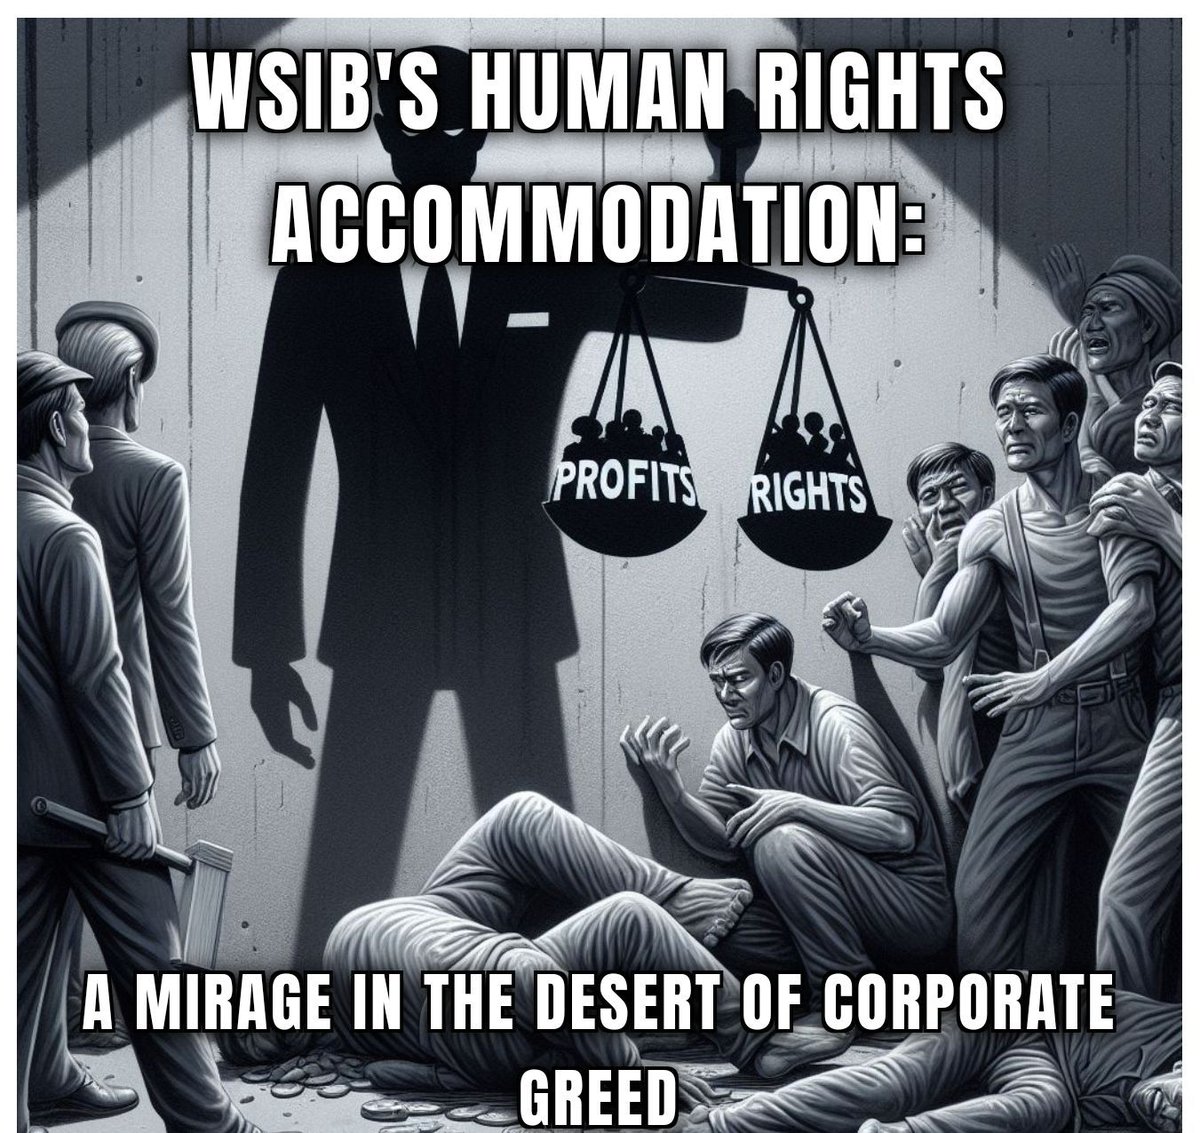 WSIB's human rights accommodations: a mirage in the desert of corporate greed.
 Let's demand real change and fair treatment for injured workers! #InjuredWorkers #HumanRights #CorporateGreed